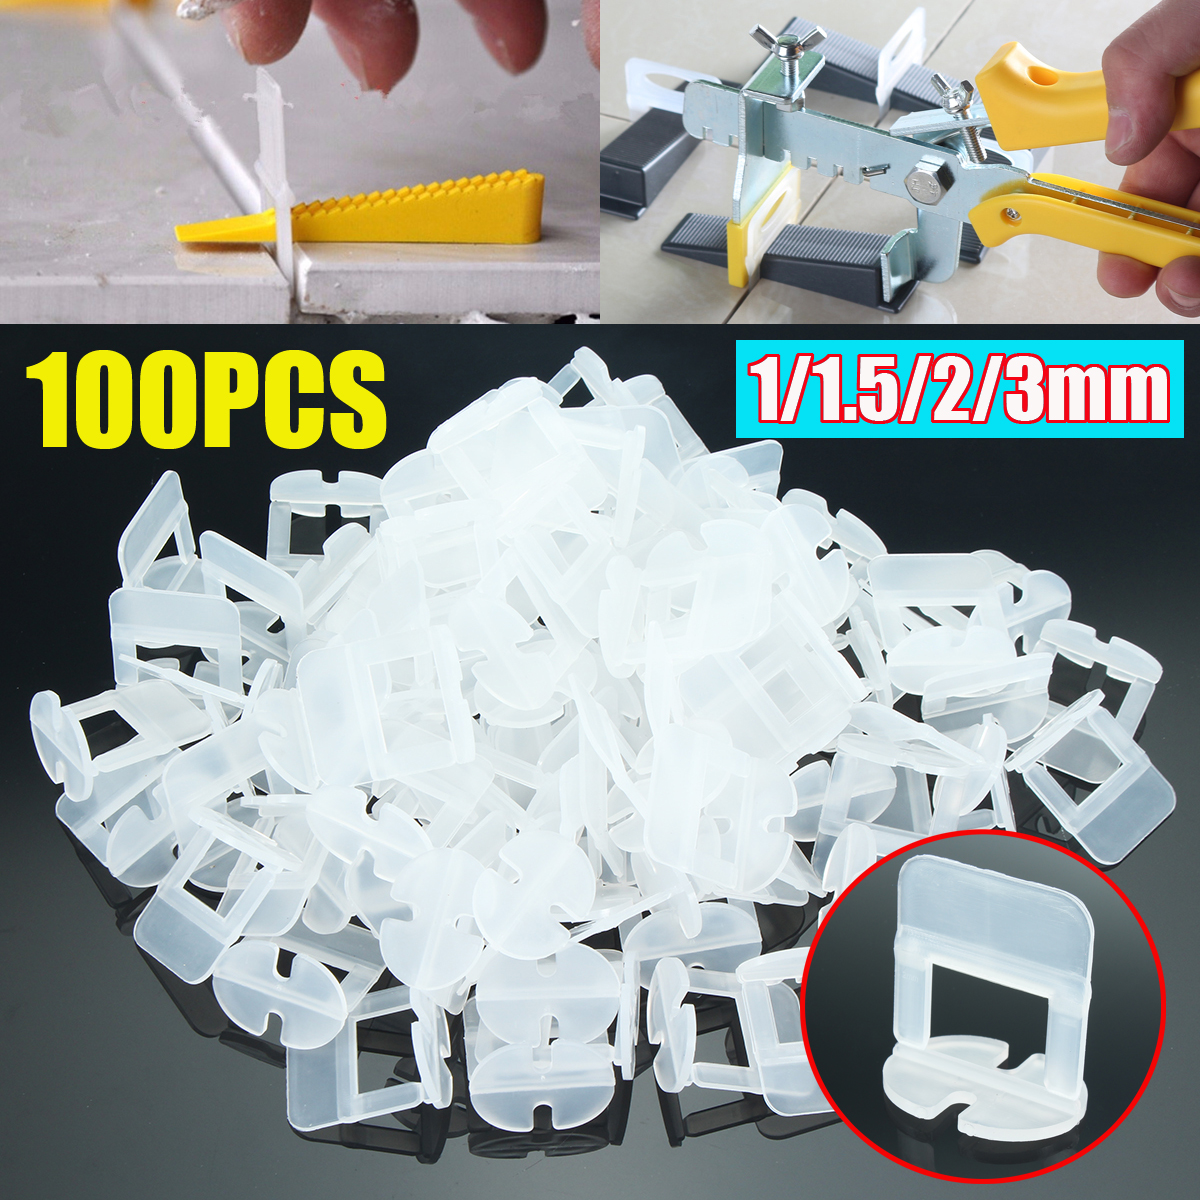 100Pcs-10152030mm-Tile-Leveling-System-Spacer-Clips-Floor-Wall-Tiling-Tool-1248356-5